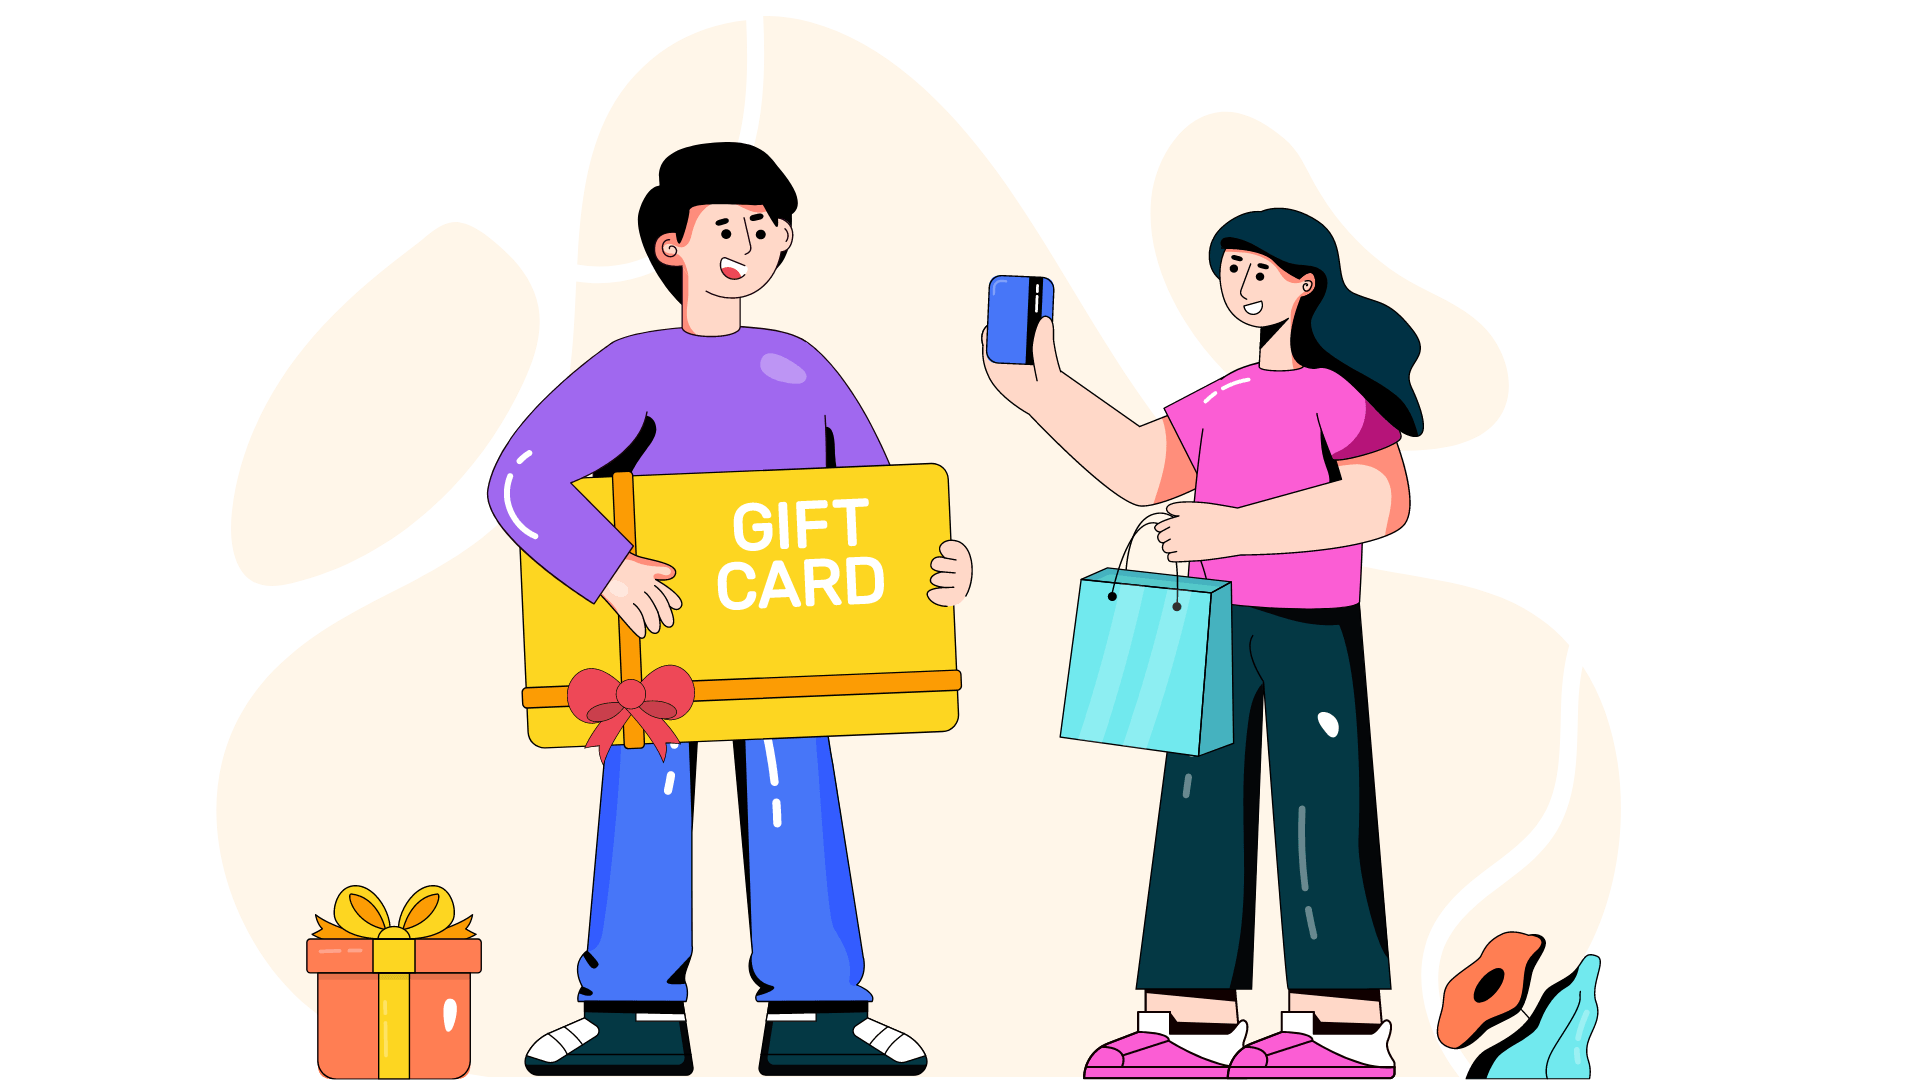 Graphic of people holding gift card